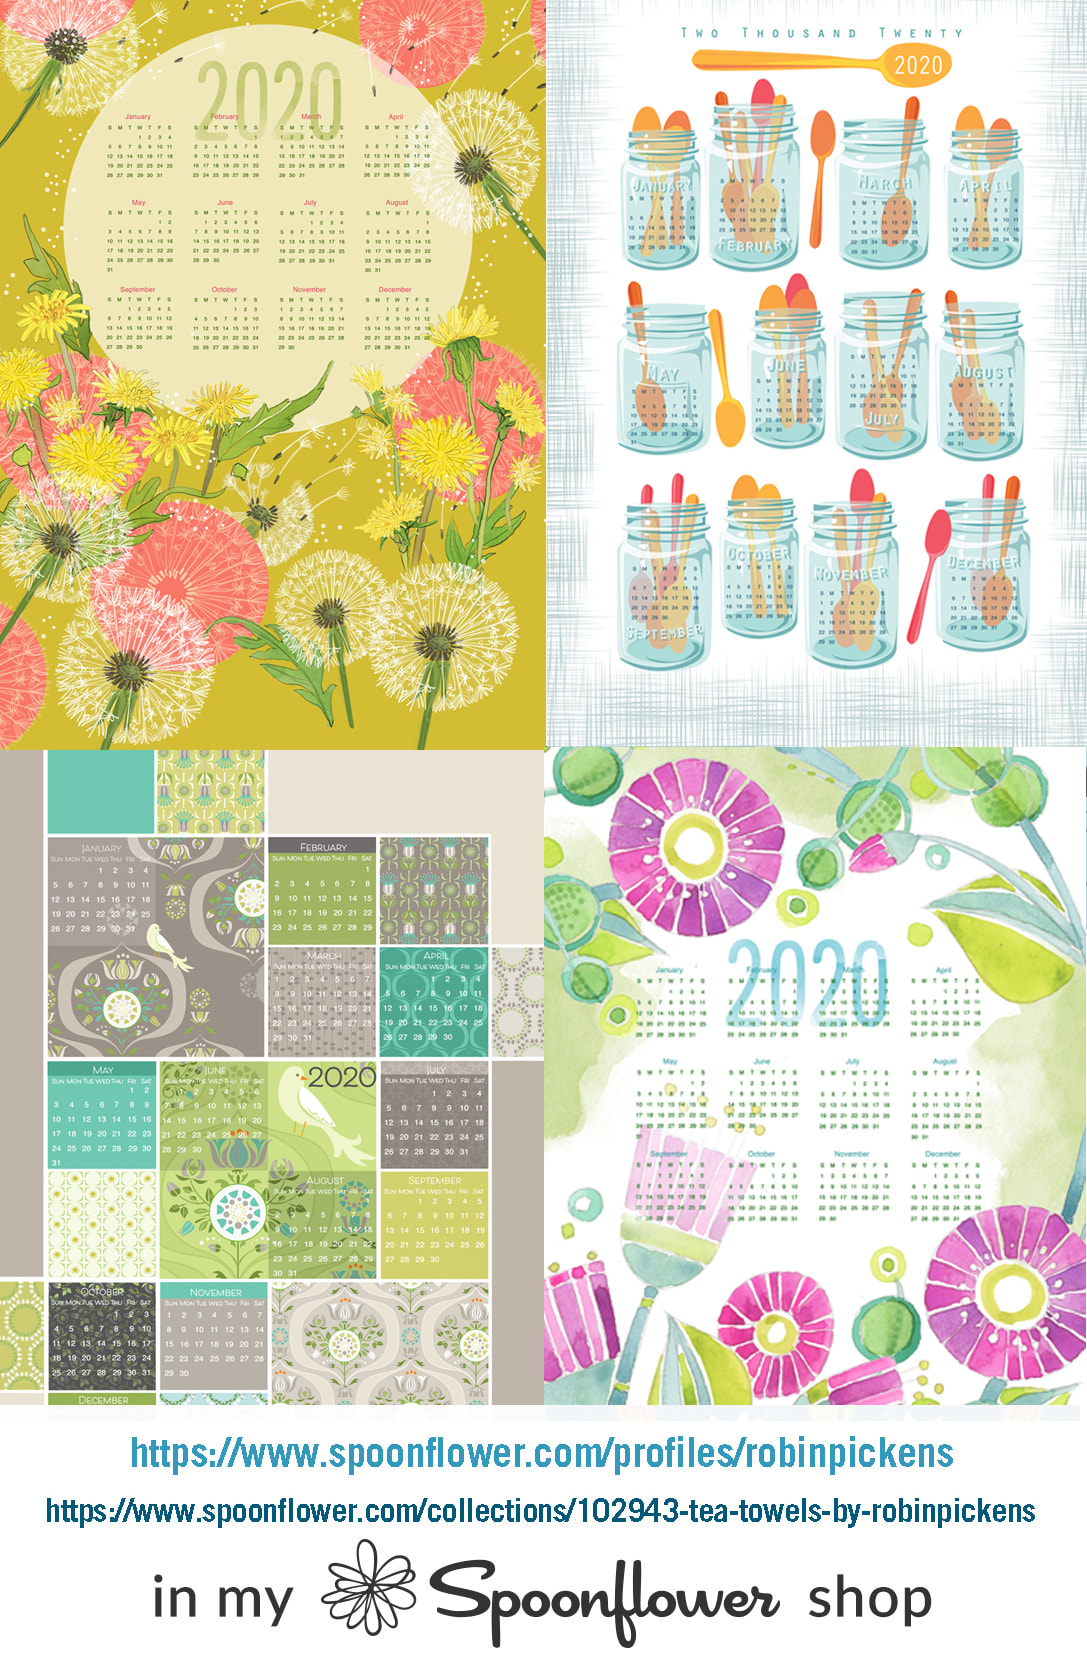 2020 calendars on paper and tea towels by Robin Pickens Robin Pickens